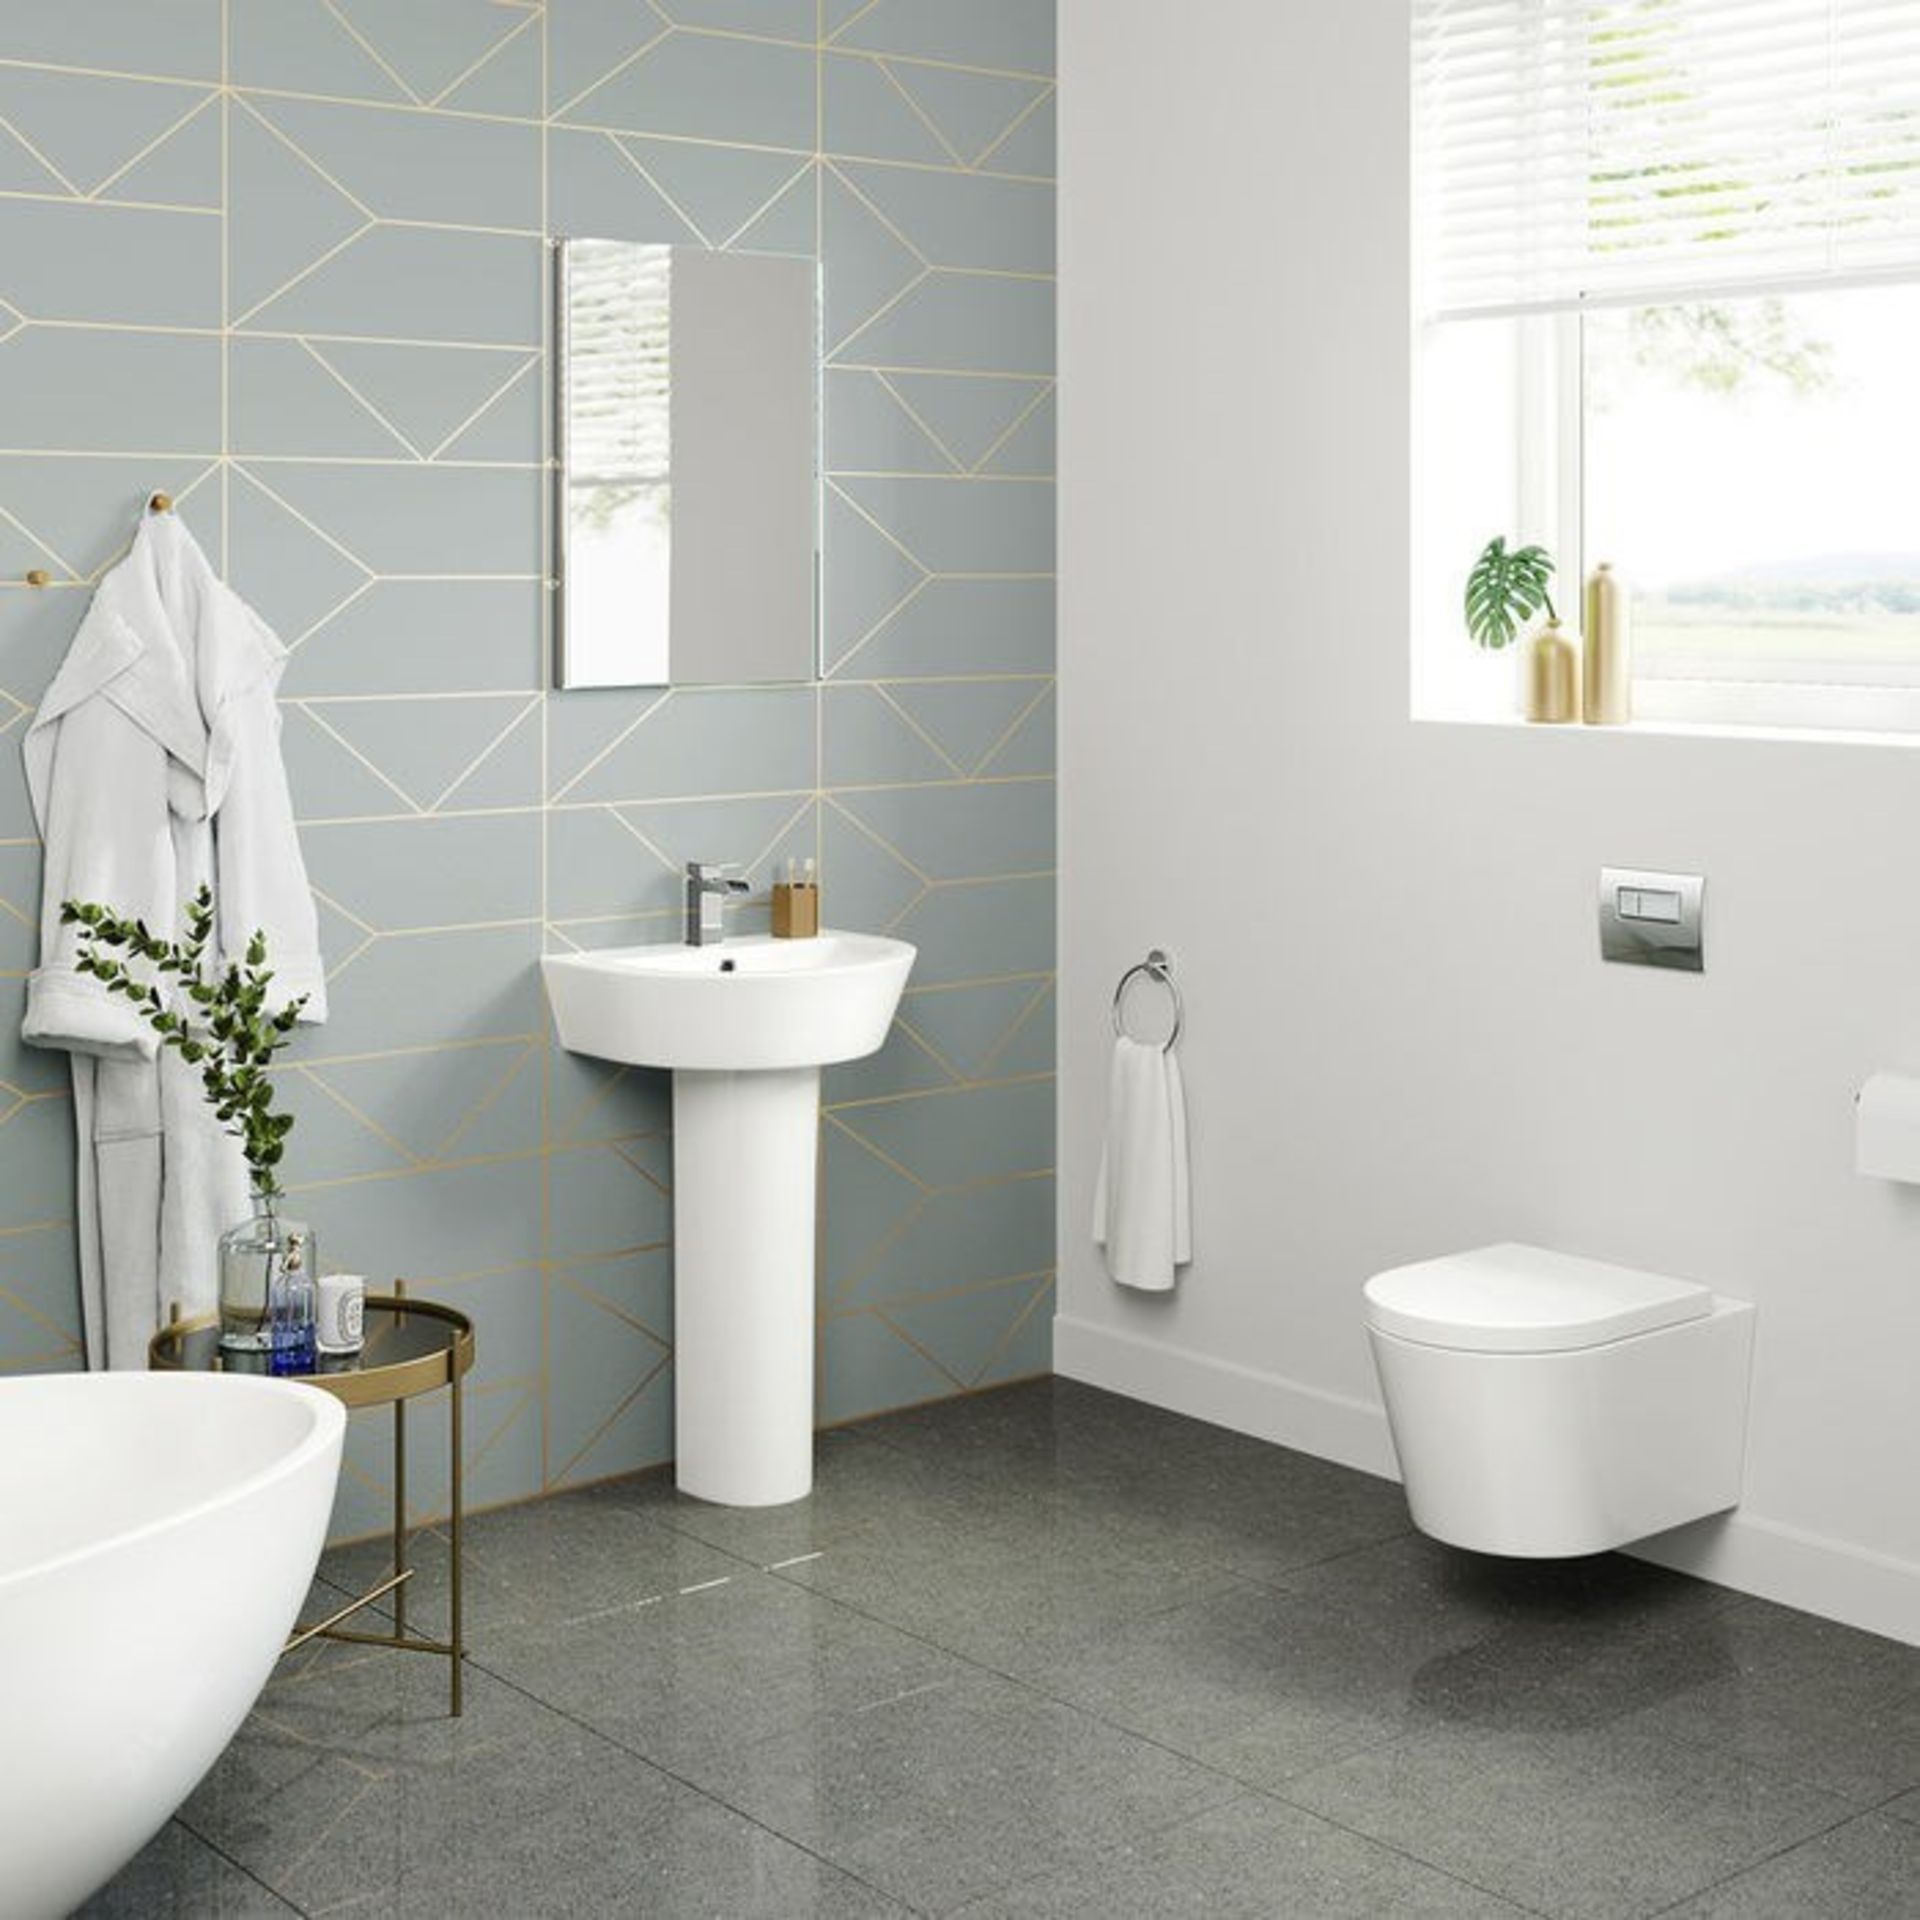 NEW & BOXED Lyon II Wall Hung Toilet inc Luxury Soft Close Seat. RRP £349.99 each.We love this... - Image 2 of 2